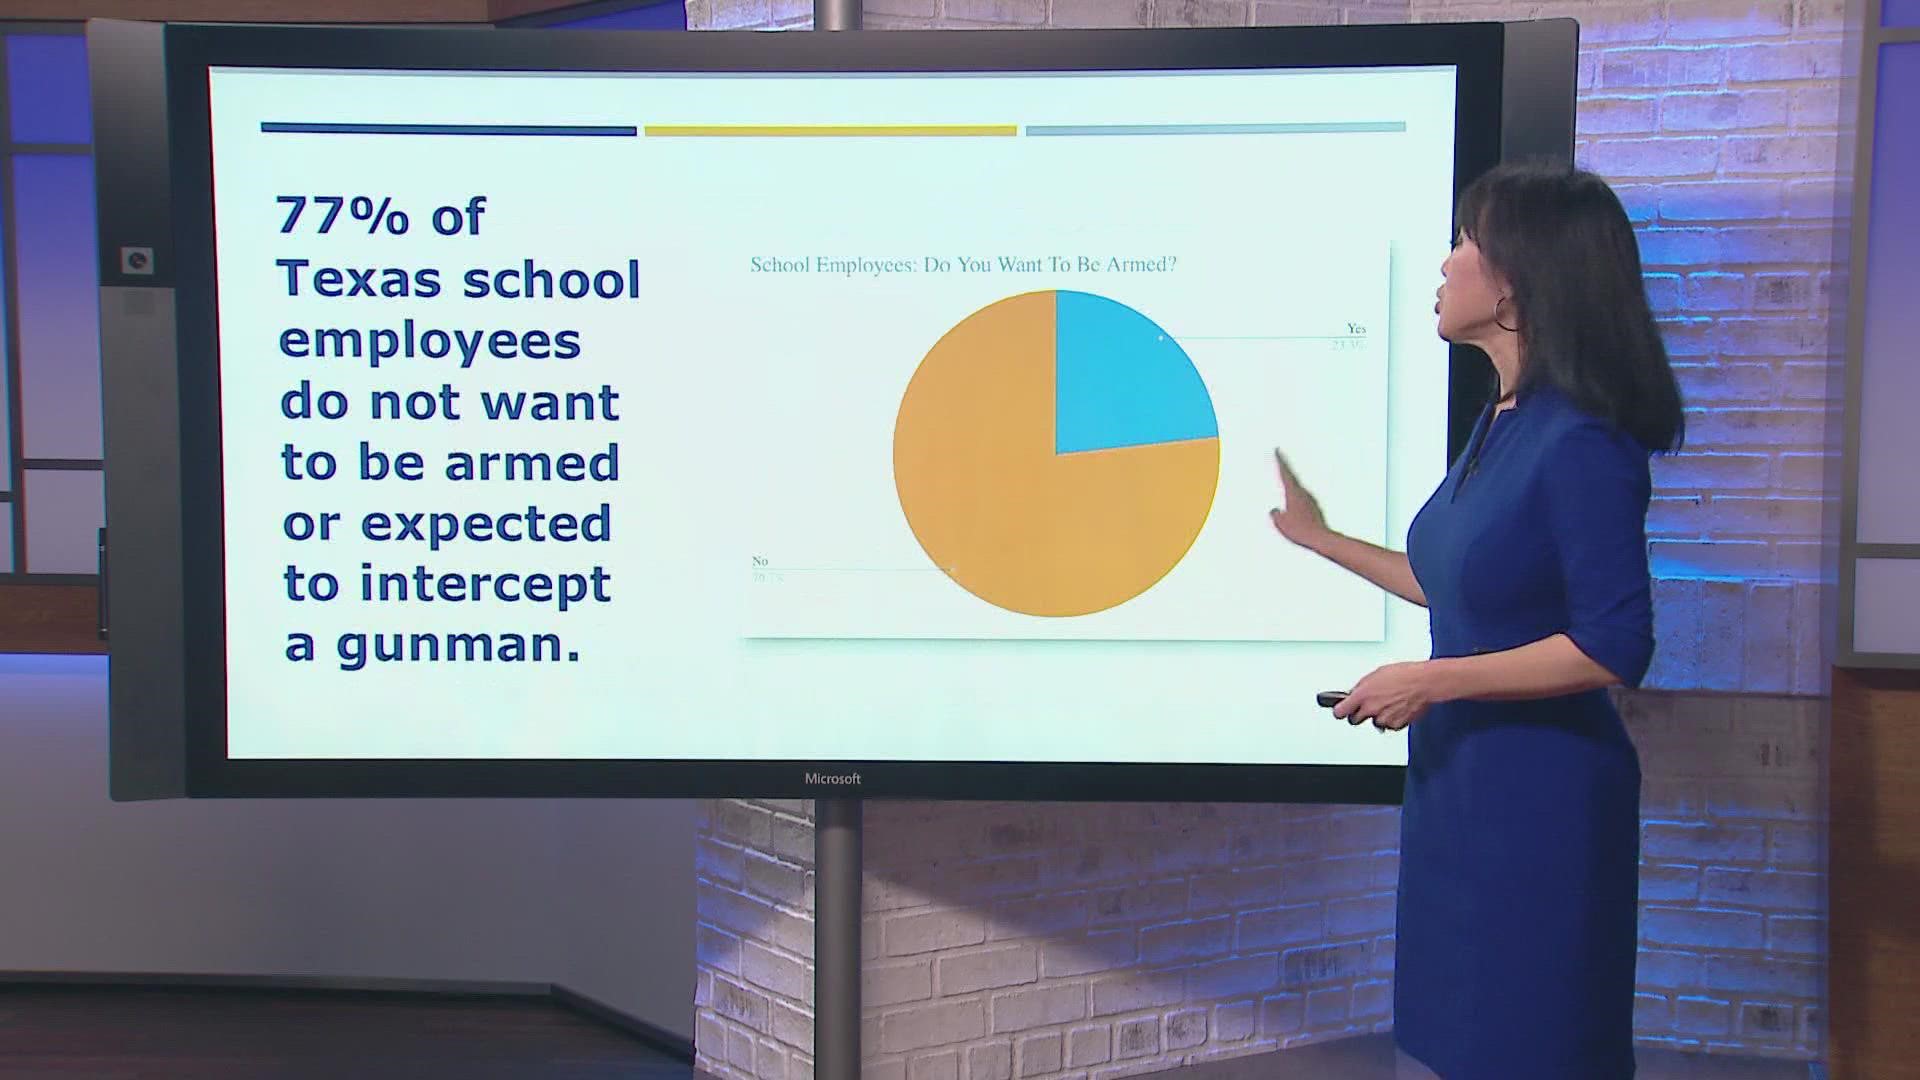 The survey was conducted by the Texas American Federation of Teachers, which examined the responses of 5,100 Texas teachers, school employees, parents and more.